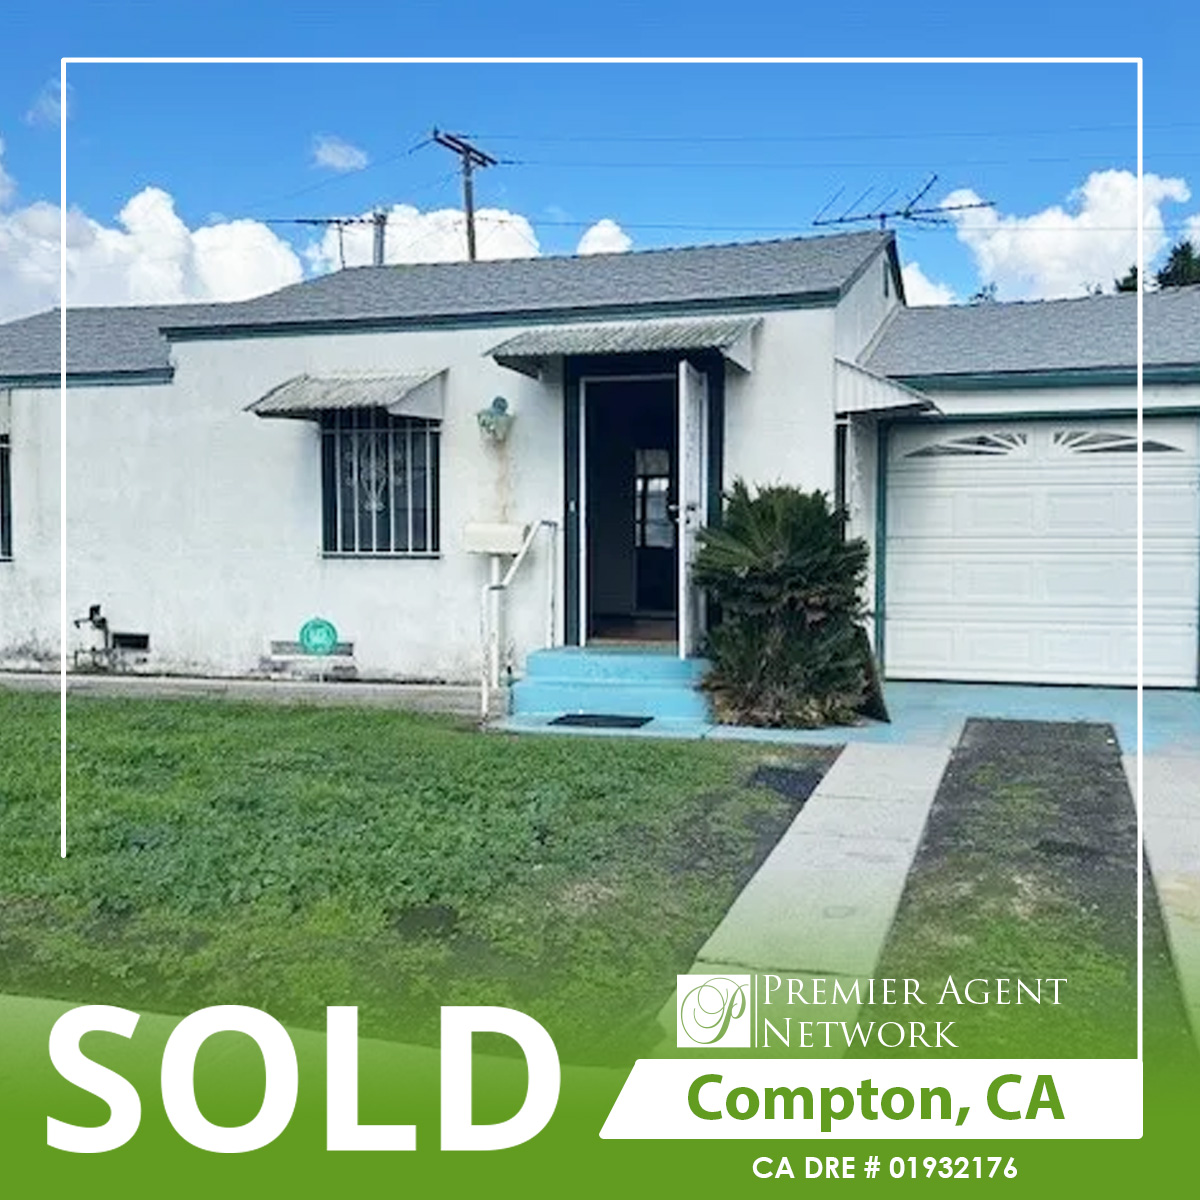 ** Sold **
1409 E 127th St, Compton, CA 90222 | $535,000
SFR, 2 bed, 1 bath, 676 sqft, 6,152 sqft lot
Listed by Christine Homsi at Premier Agent Network

#DalyCity #ca #california #Singlefamily #residential #homes #home #realtor #agent #realestateagent #premieragentnetwork